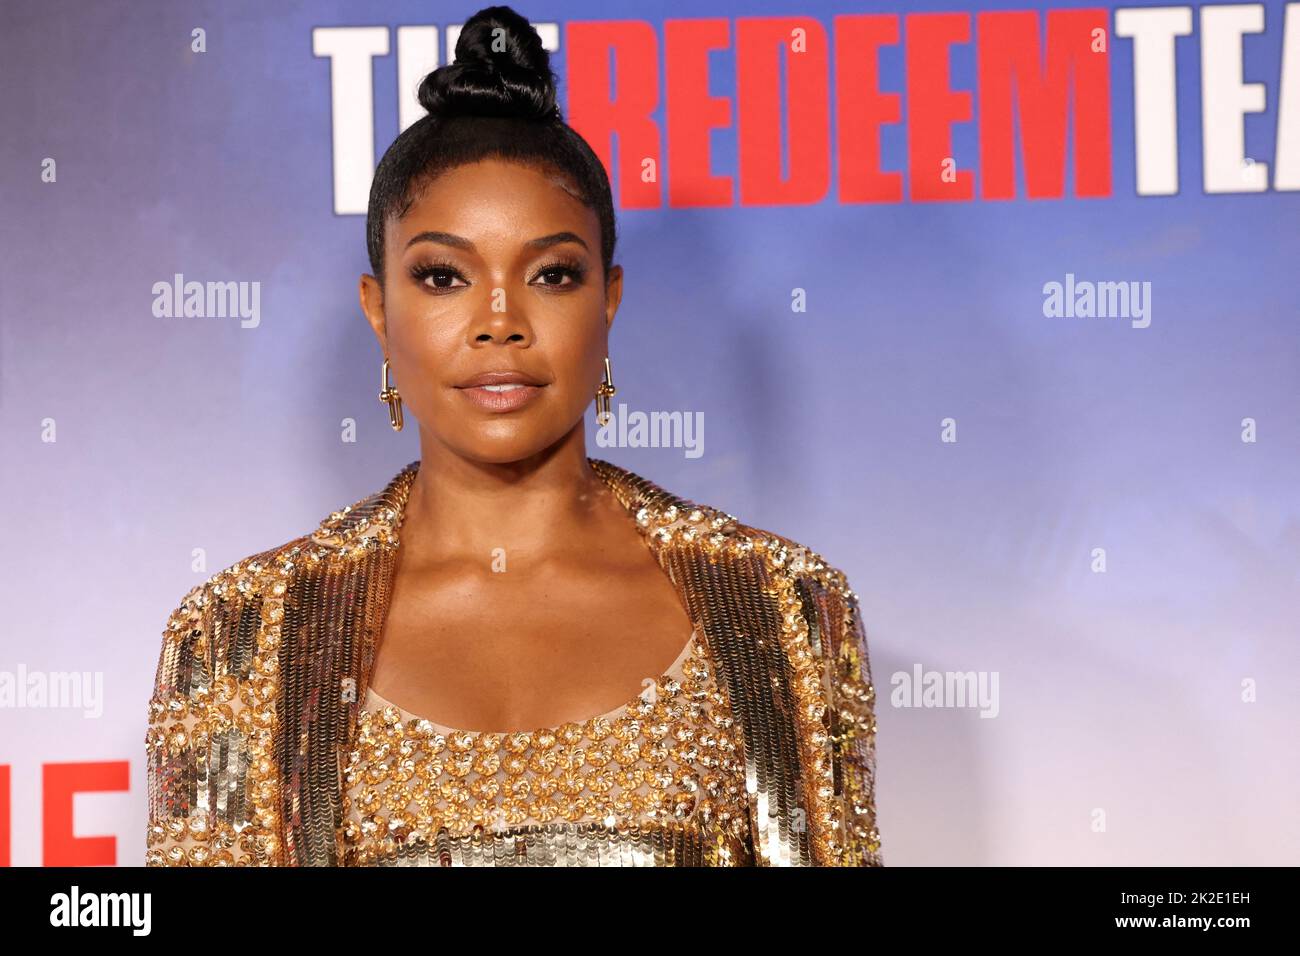 Gabrielle Union attends a screening for the documentary 'The Redeem Team' in Los Angeles, California, U.S. September 22, 2022.  REUTERS/Mario Anzuoni Stock Photo